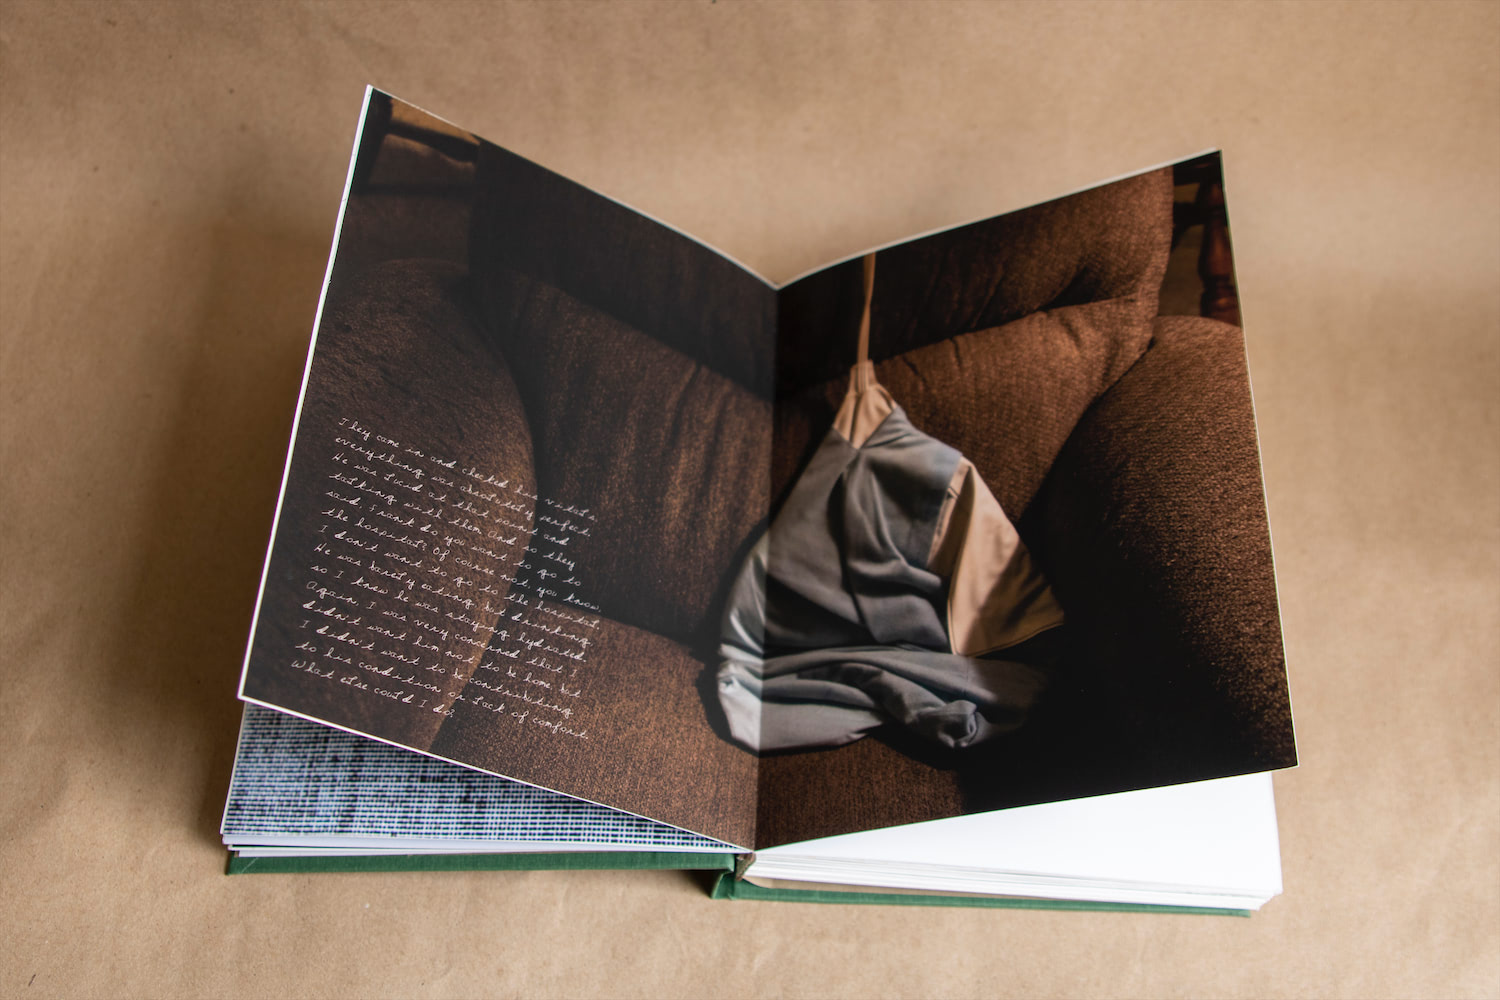 An opened spread of a book showing an image of a chair and heating pad with handwriting text at the bottom.